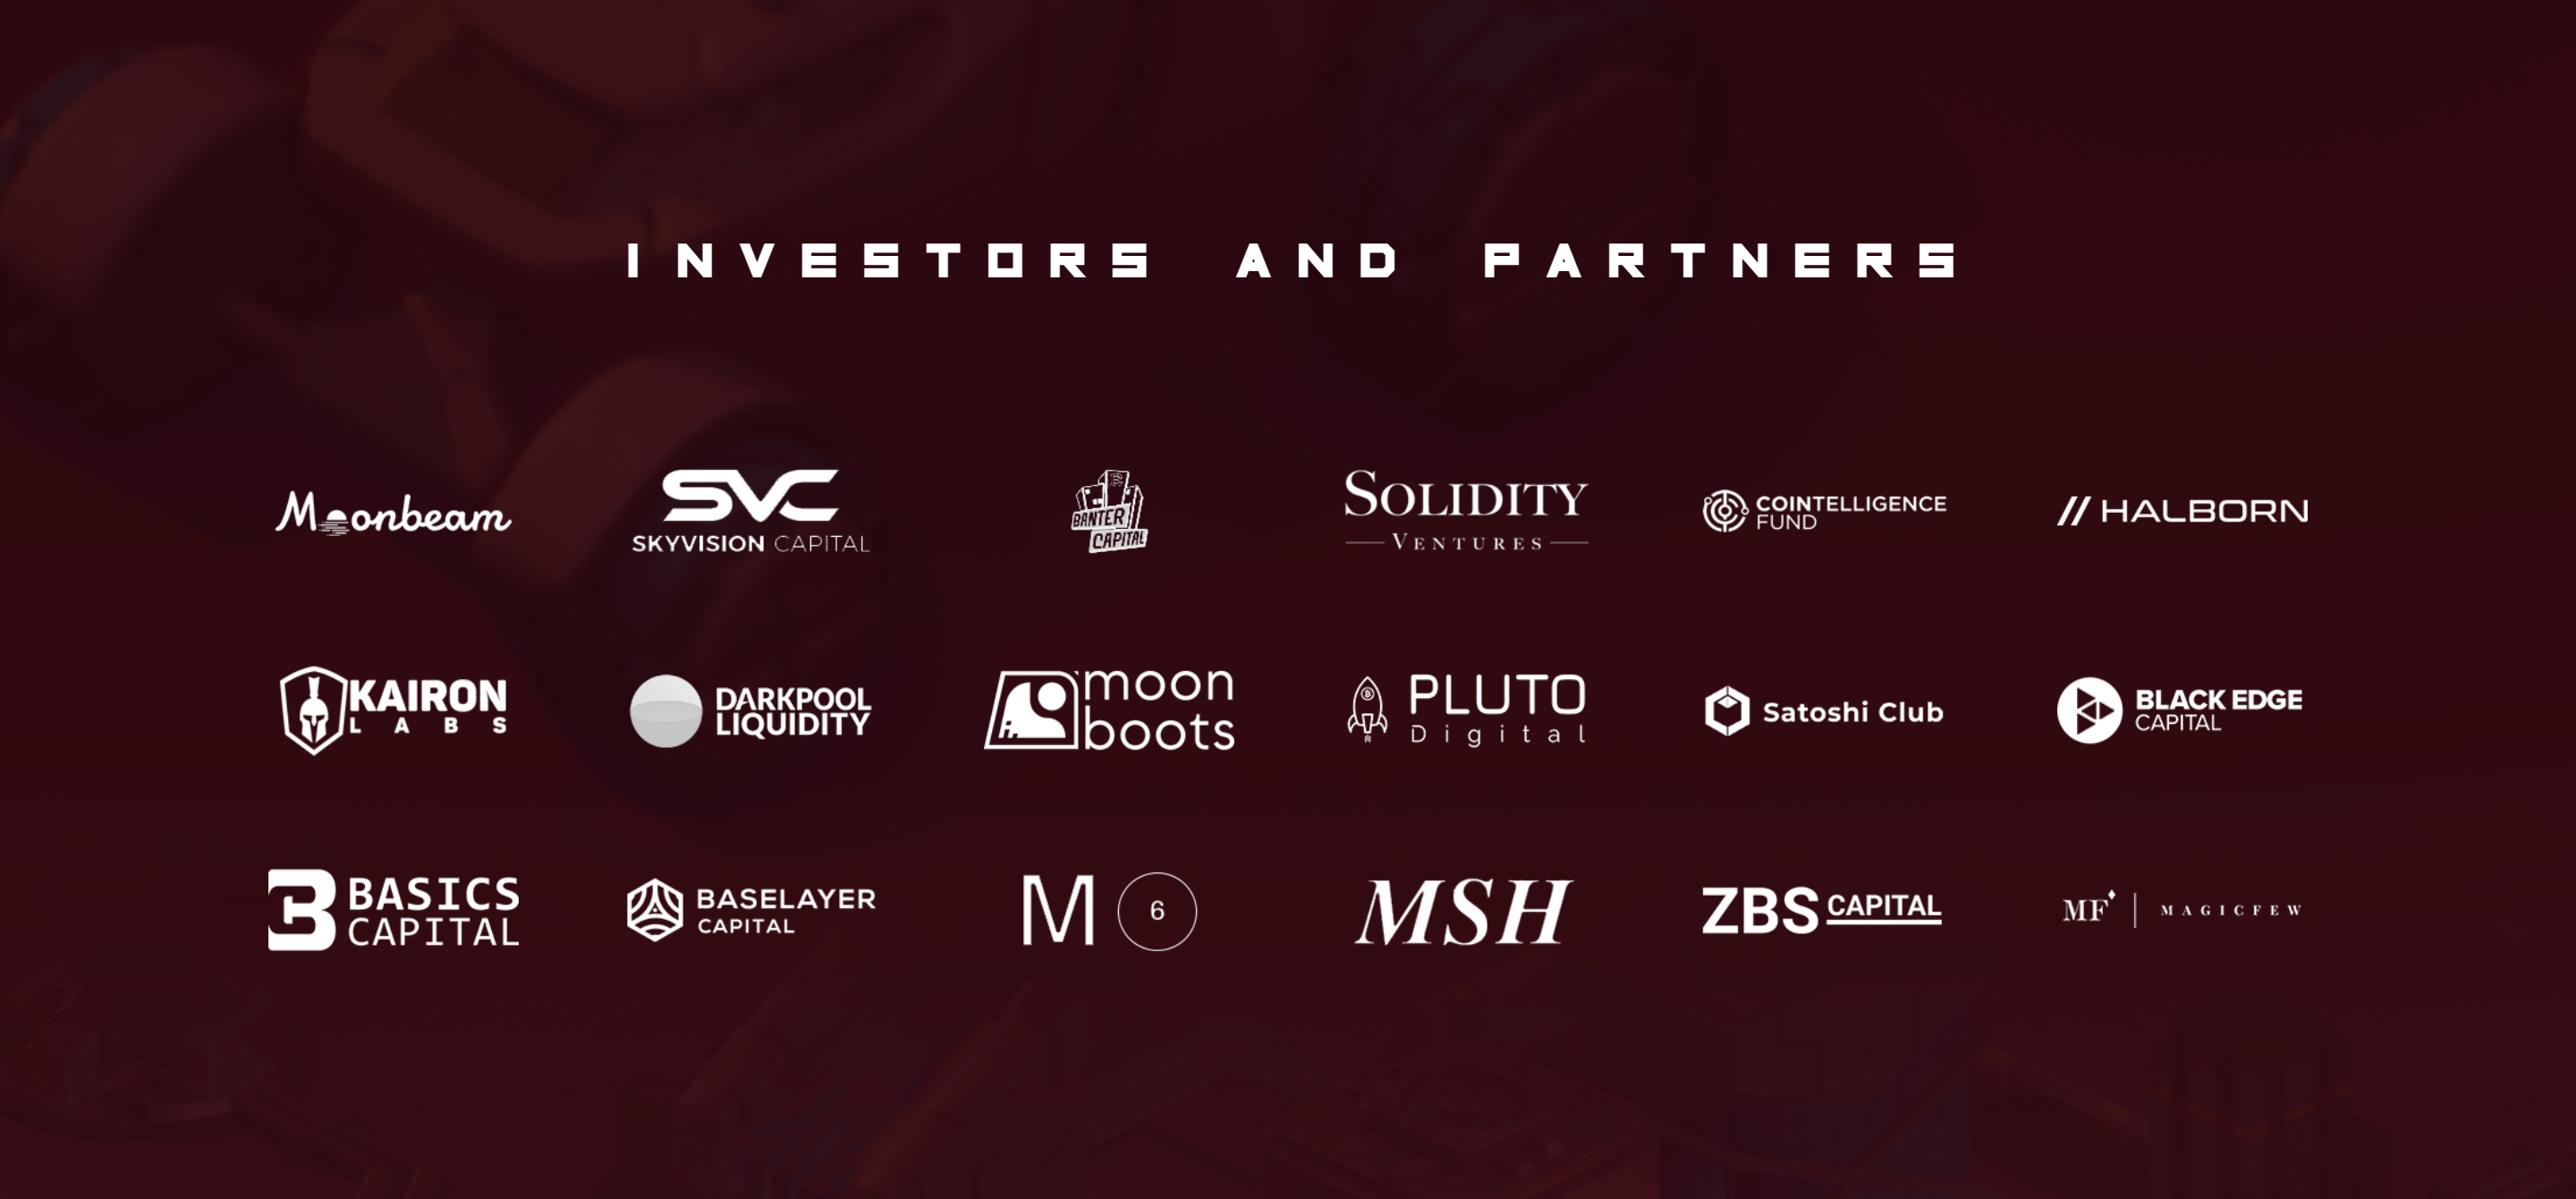 Moonscape Investors and Partners